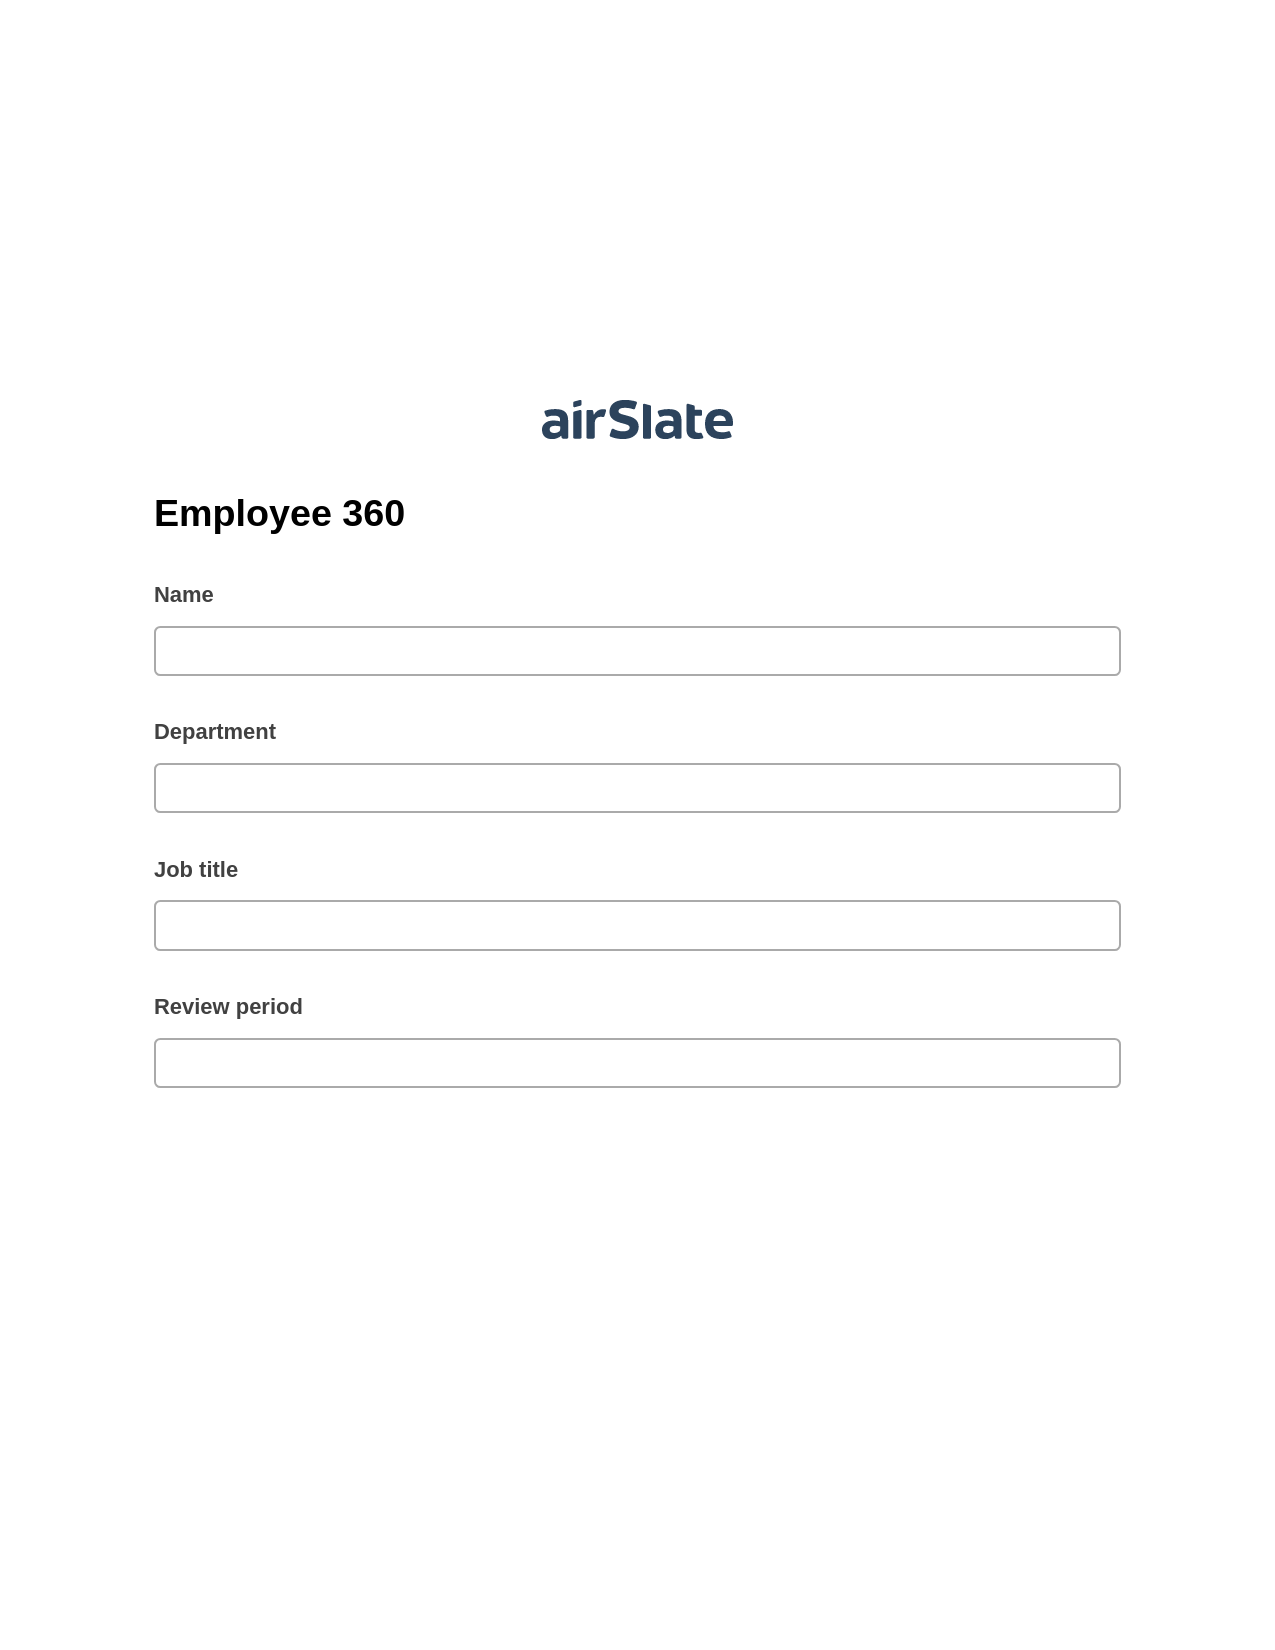 Employee 360 Prefill from NetSuite records, Update MS Dynamics 365 Record Bot, Export to Google Sheet Bot